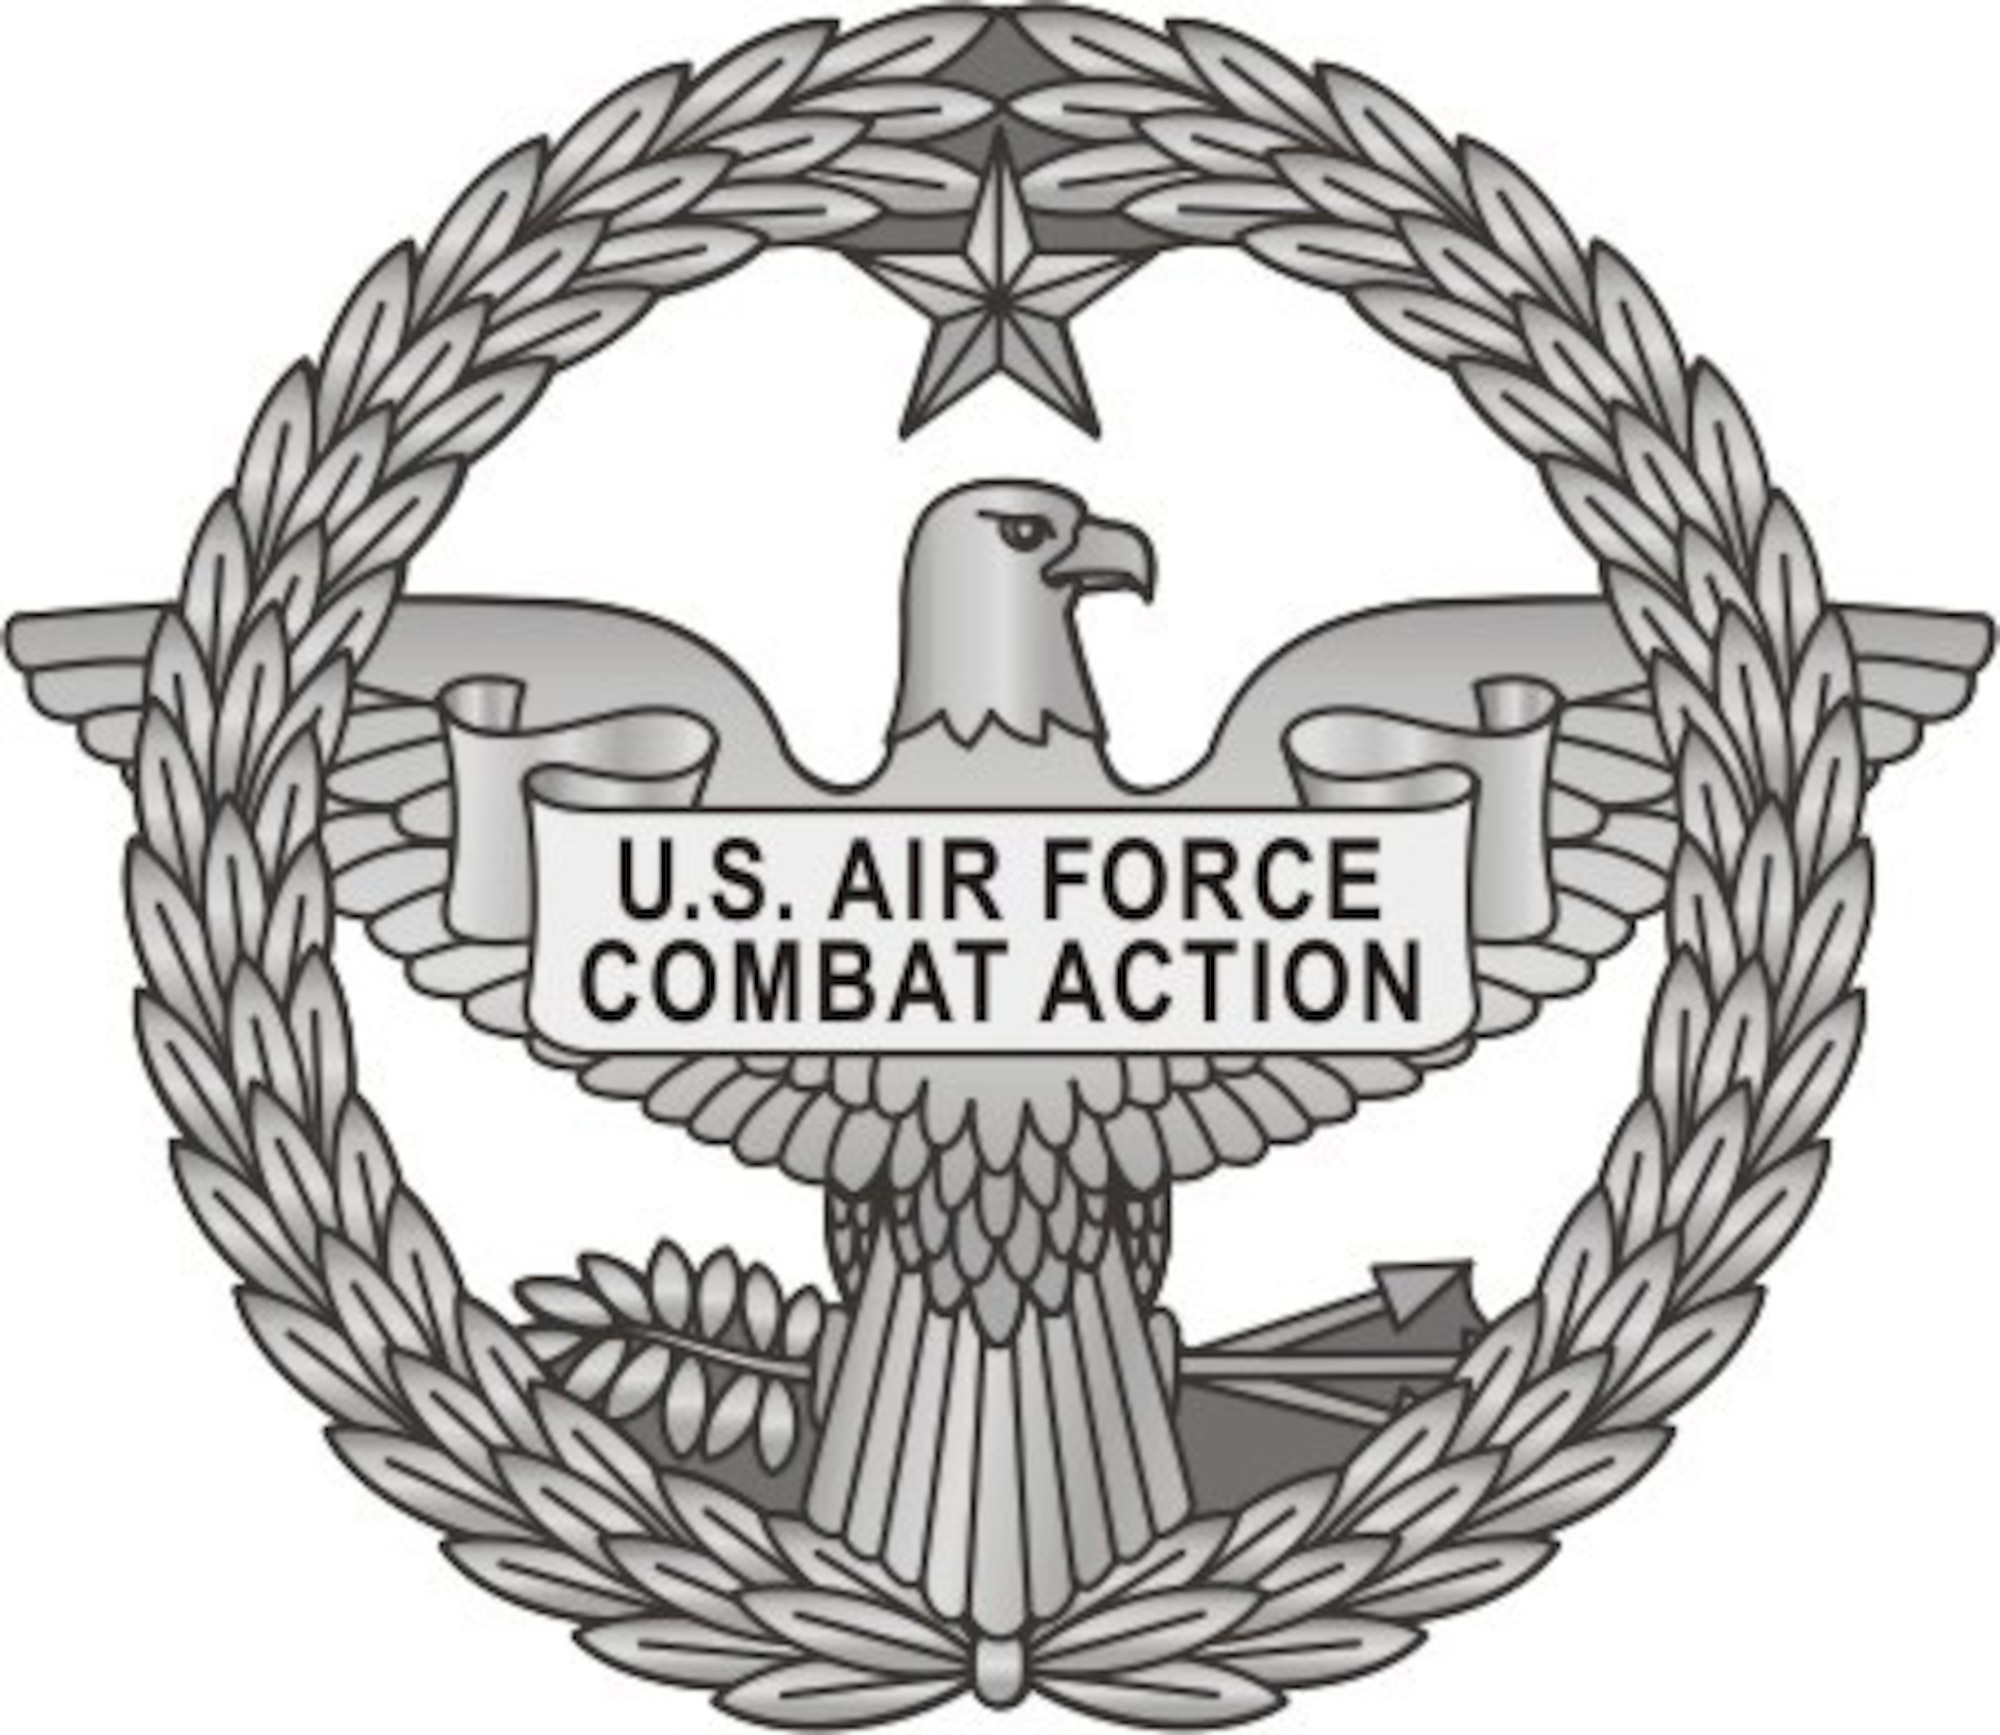 The reverse side of the Air Force combat action medal. (U.S. Air Force graphic)